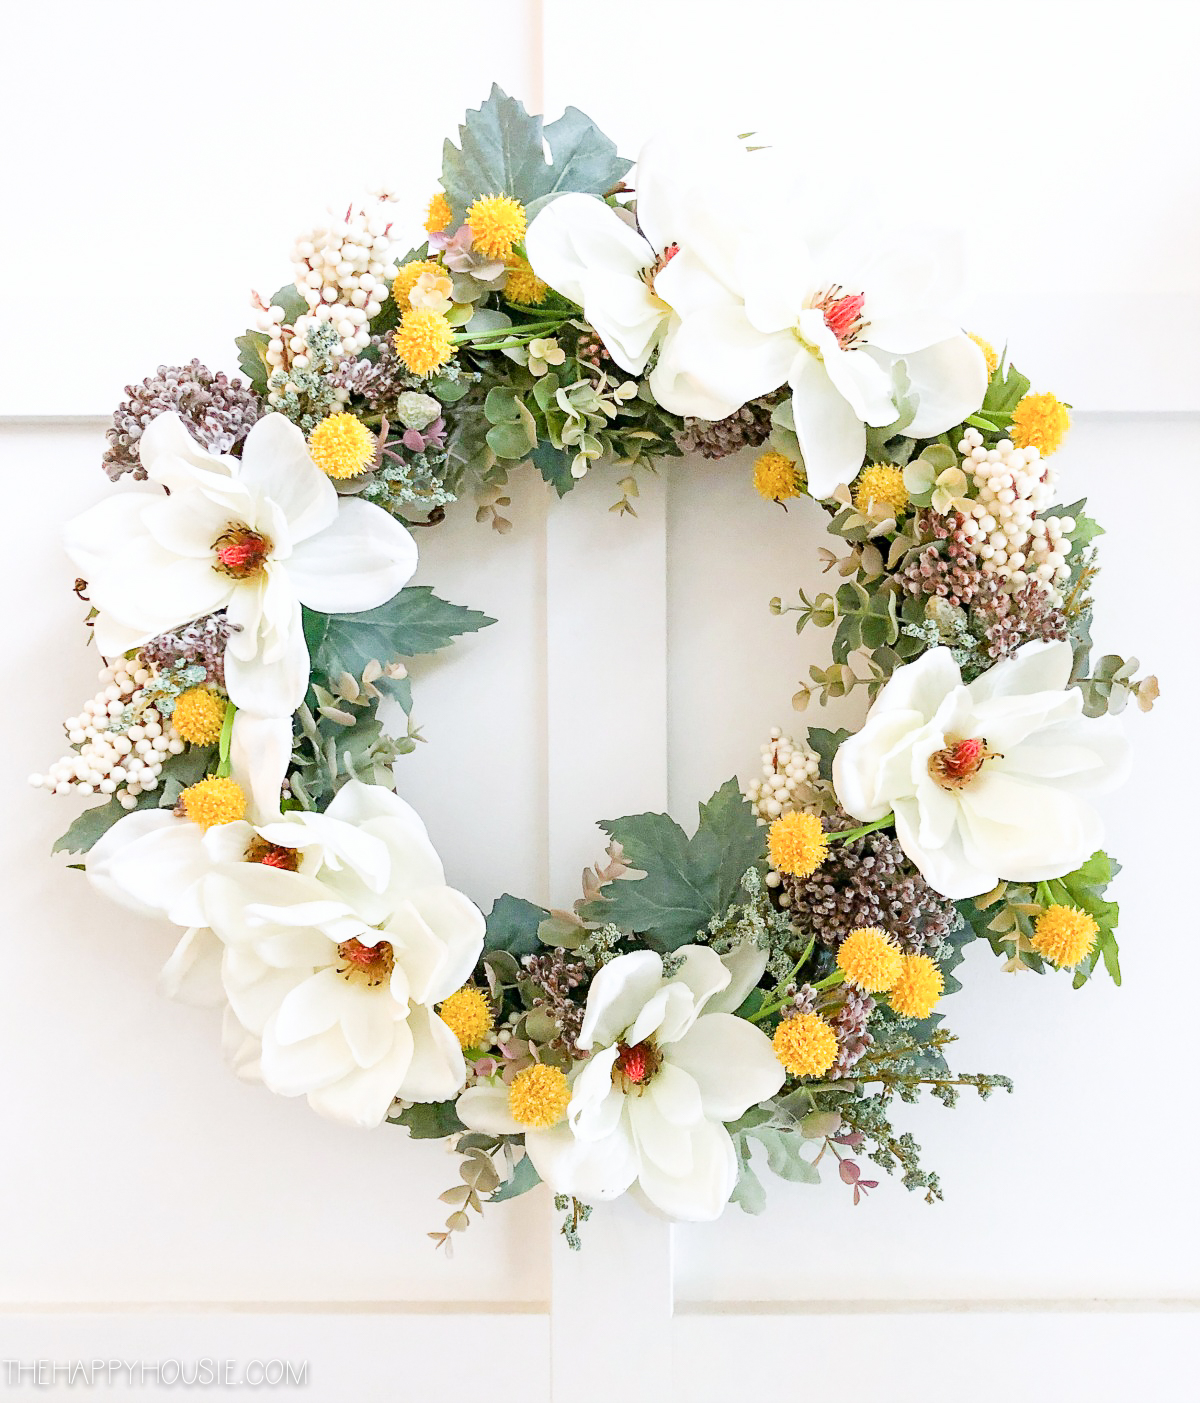 The wreath on a white door with the yellow flowers and greens.